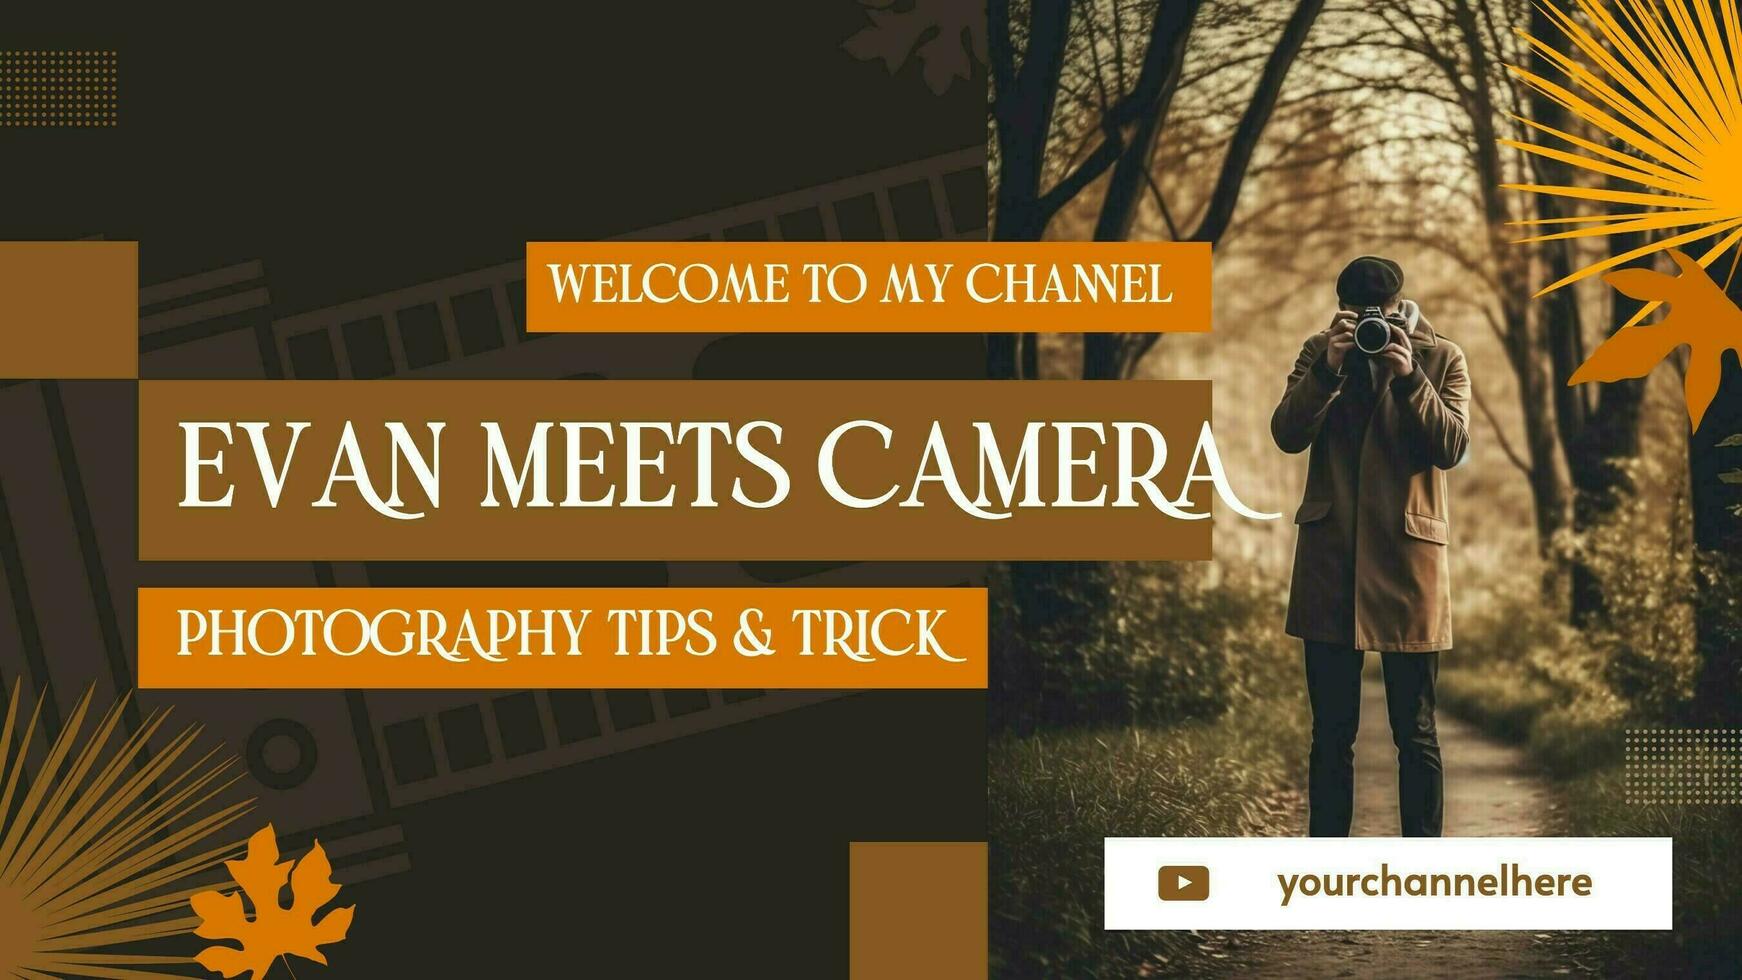 Classic Orange Brown Vintage Style for Youtube Banner template